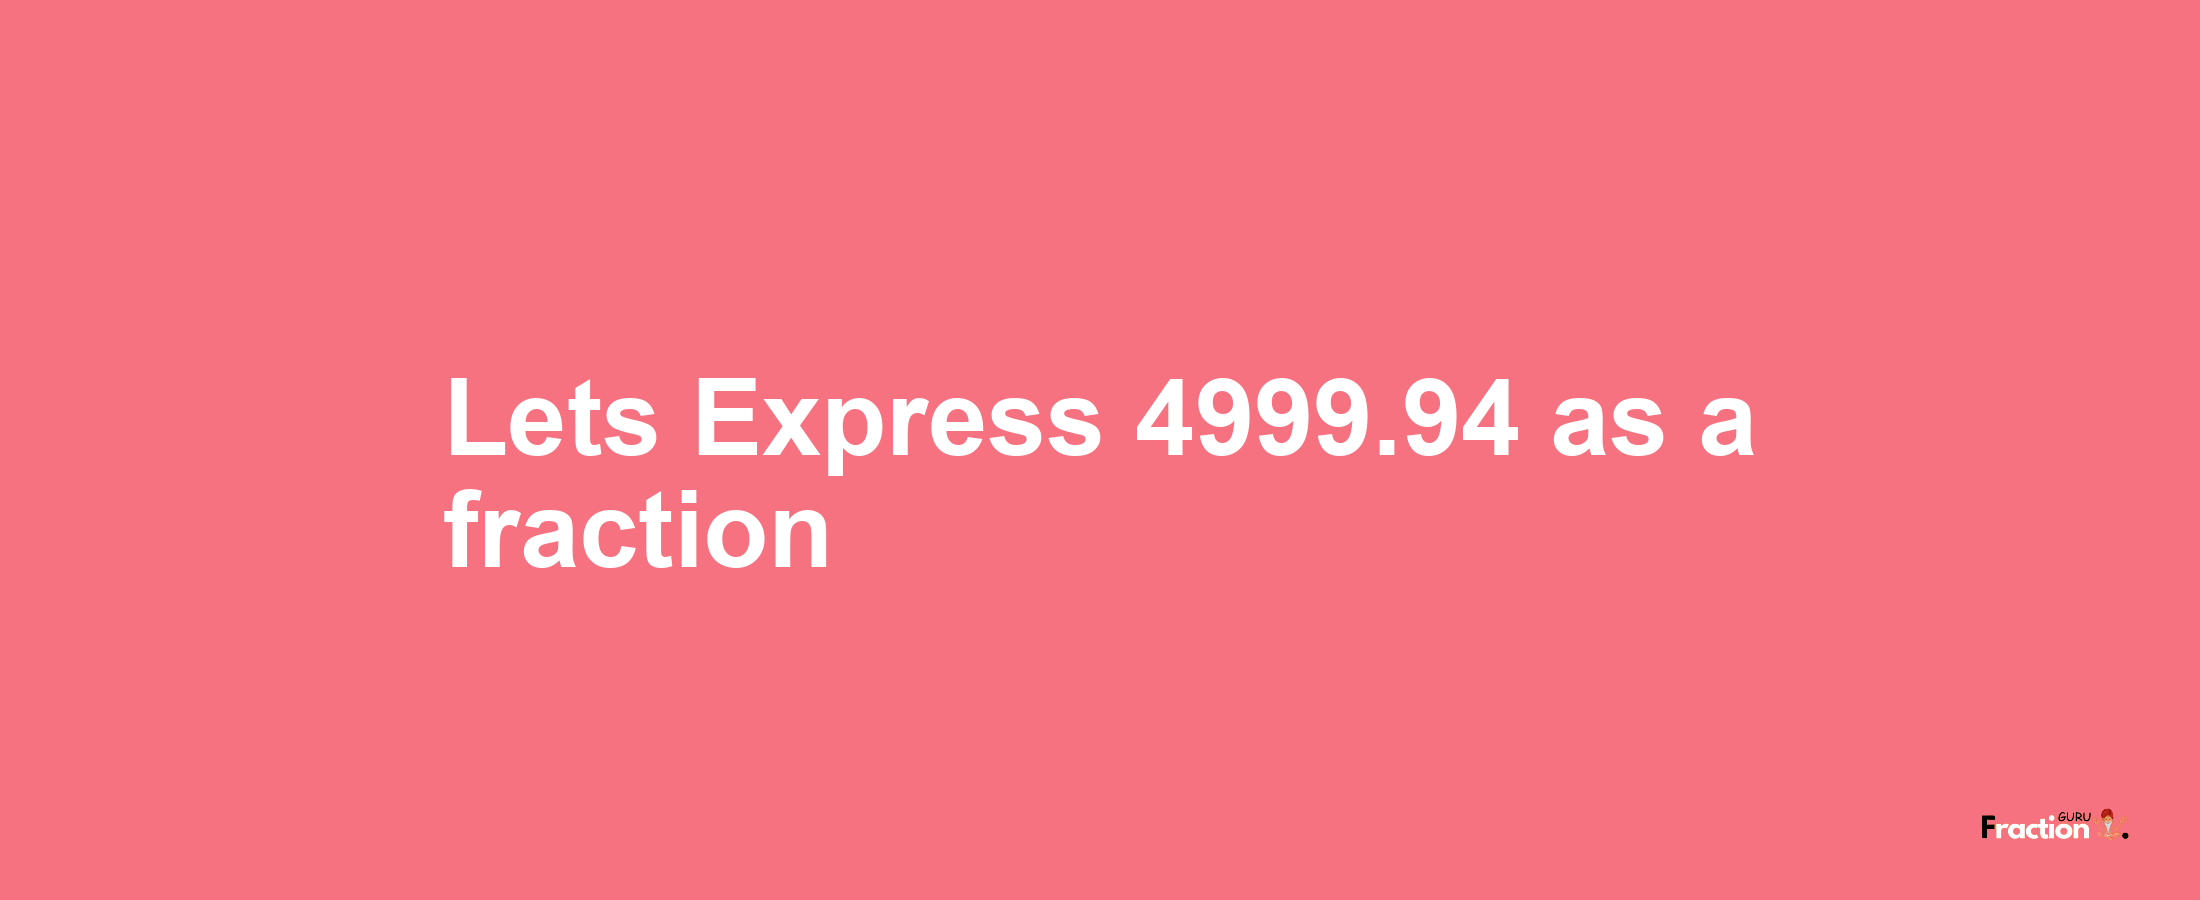 Lets Express 4999.94 as afraction